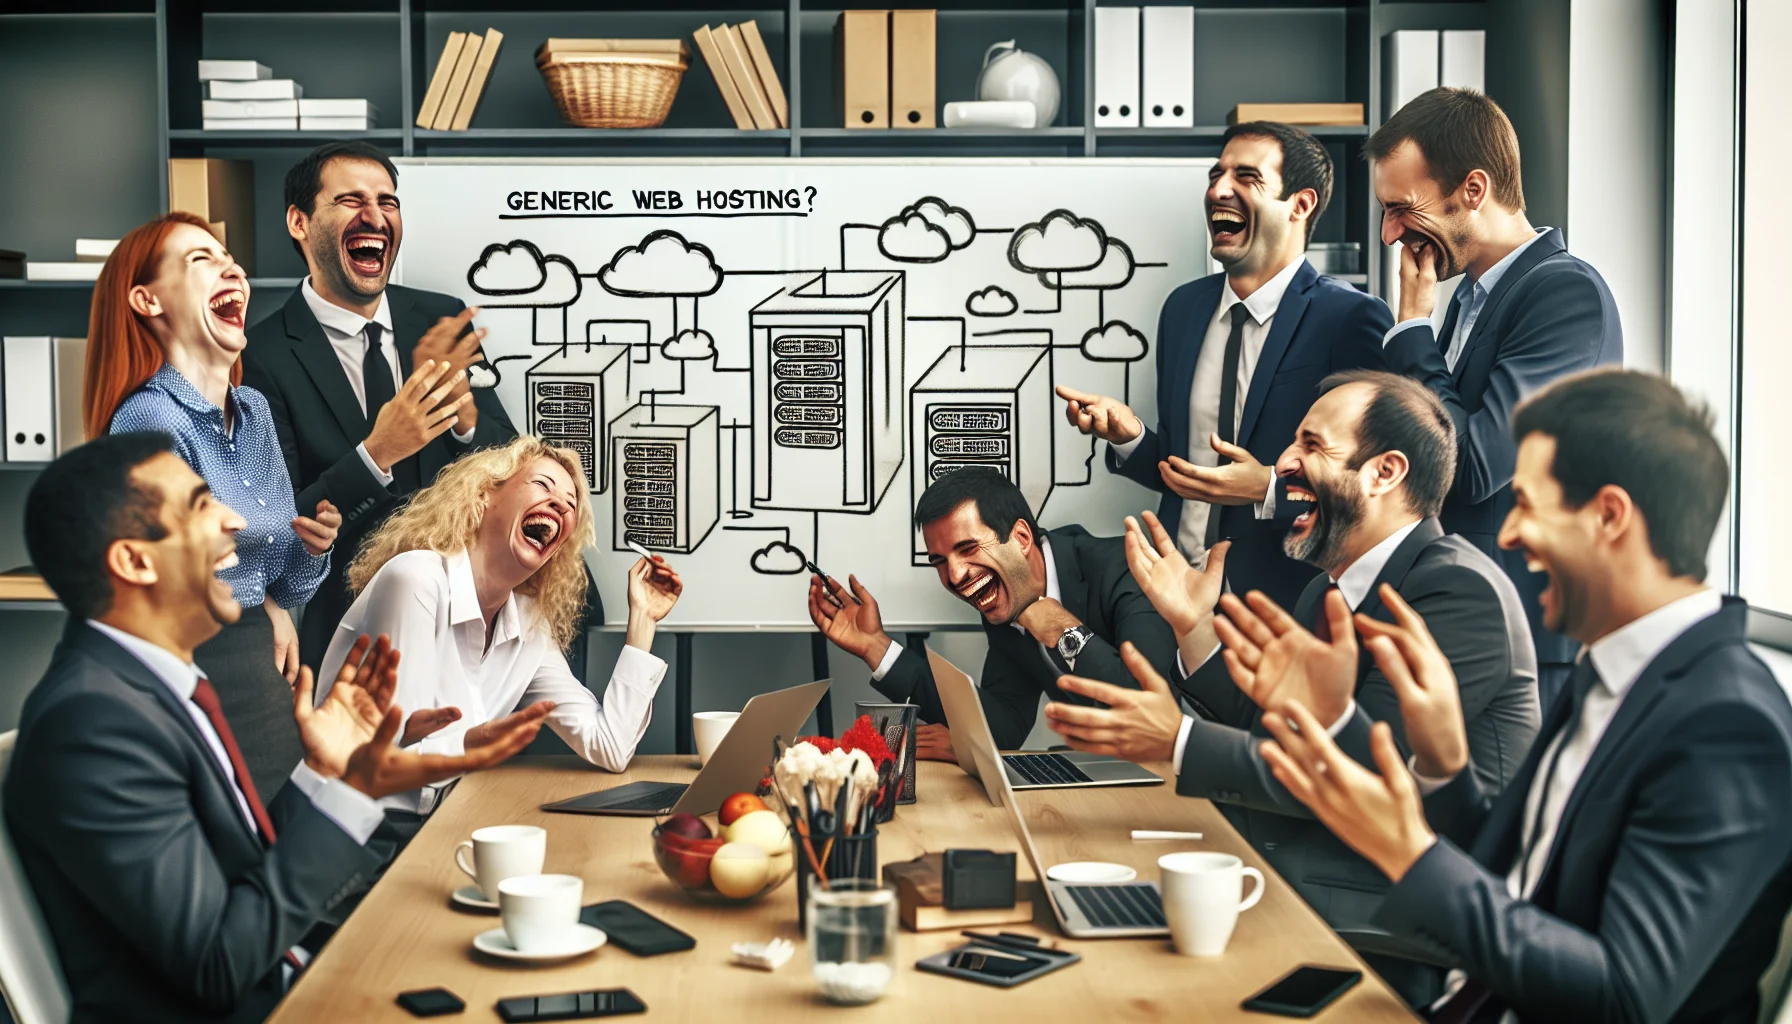 Create a humorous and relatable scenario in an office setting where generic web hosting employees are having a lively conversation. They are all laughing, gesturing towards a whiteboard with complex cloud architecture diagrams. The room is filled with technological gadgets and coffee mugs, creating a casual yet professional ambiance. Make sure the image depicts a multinational, gender-diverse team of IT professionals, and the comedy element could be found in unexpected infrastructure solutions they are proposing.